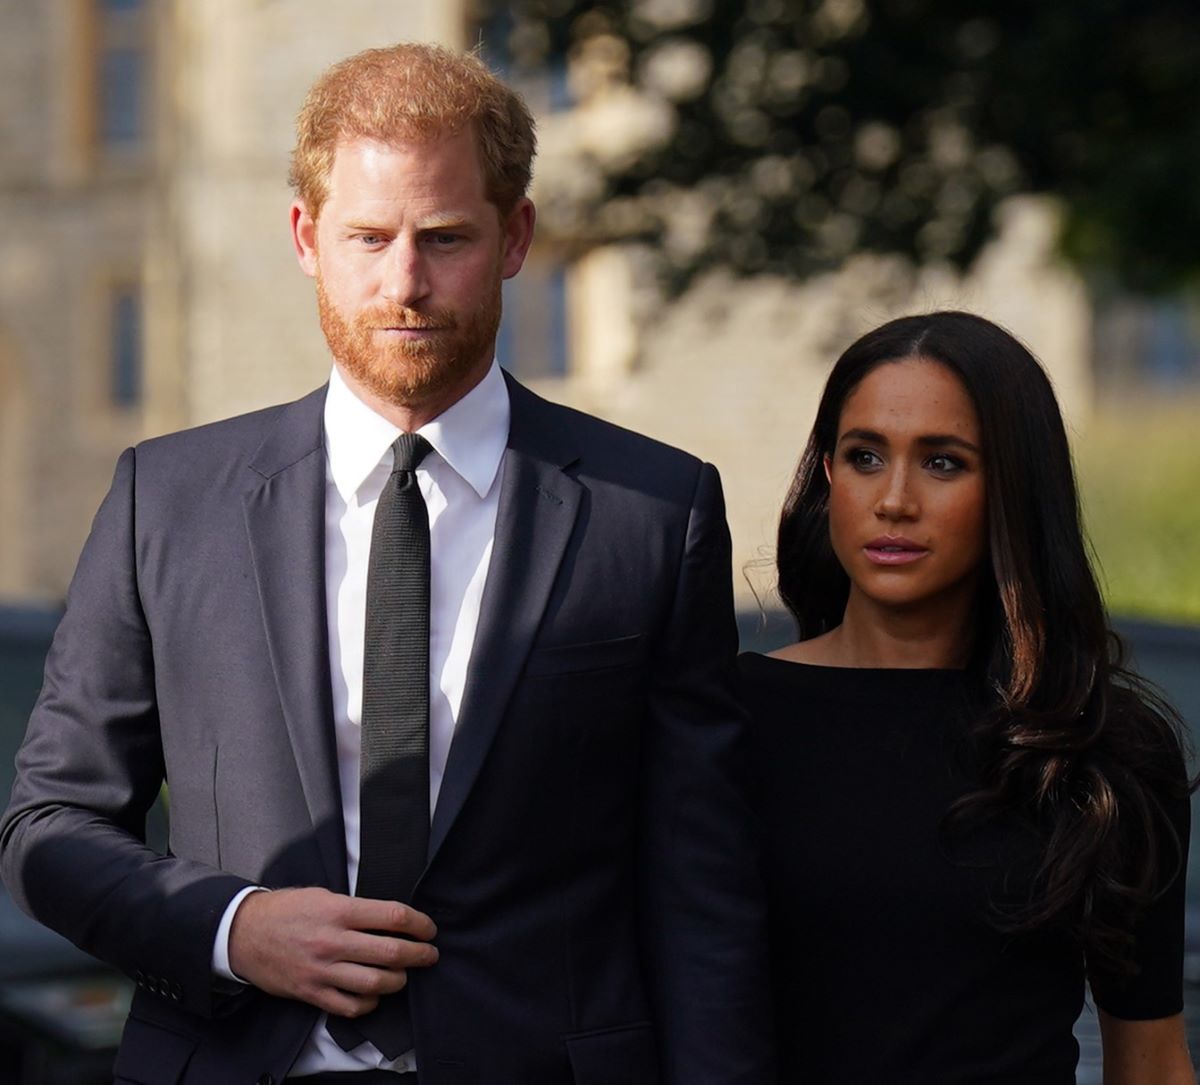 Prince Harry and Meghan Markle walk together to meet members of the public at Windsor Castle after Queen Elizabeth II's death